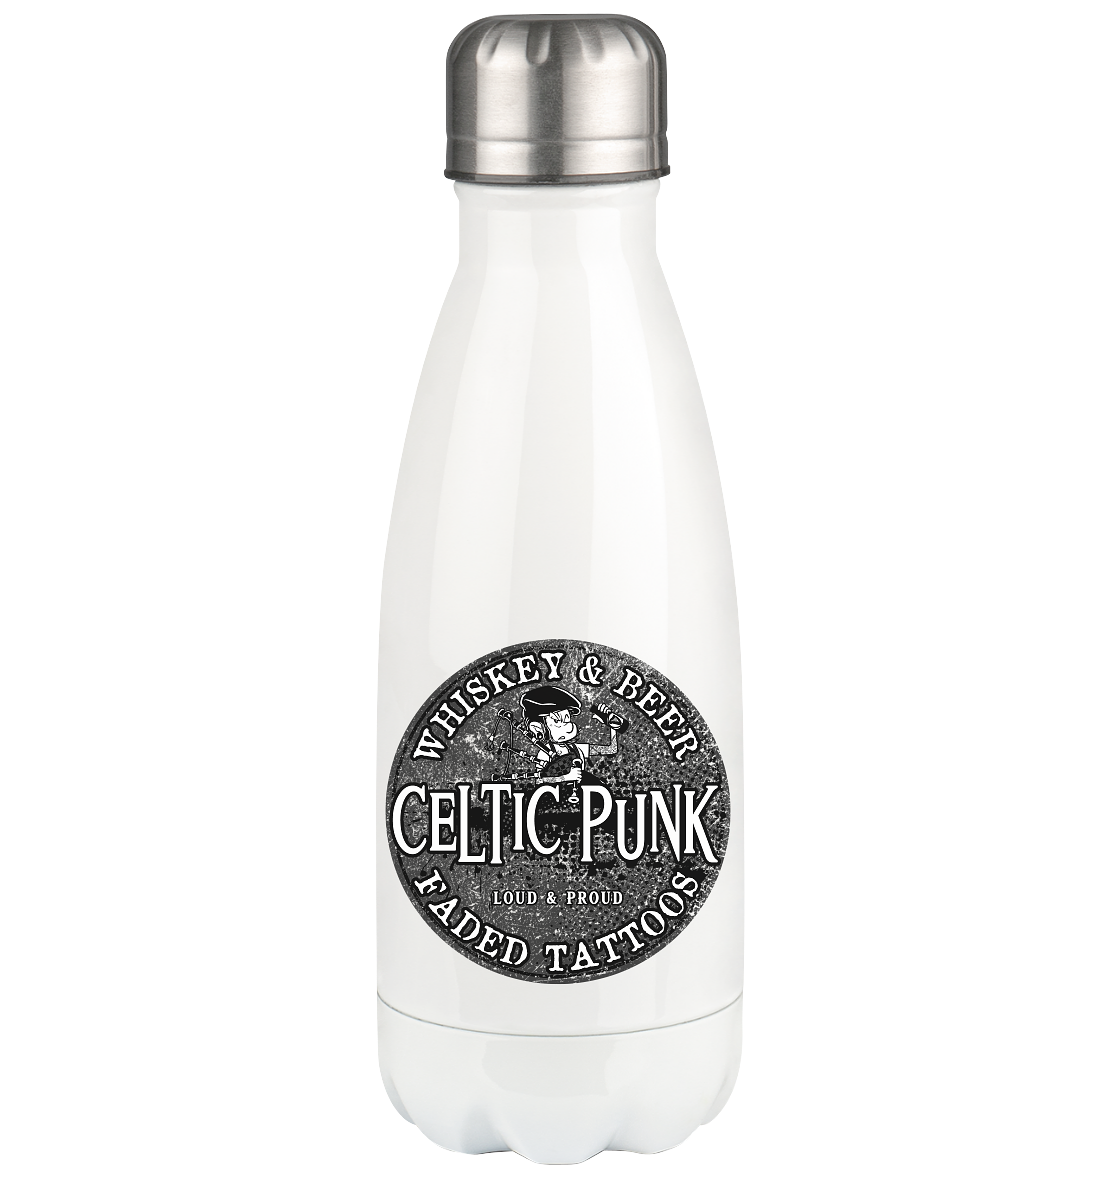 Celtic Punk "Whiskey, Beer & Faded Tattoos" - Thermoflasche 350ml